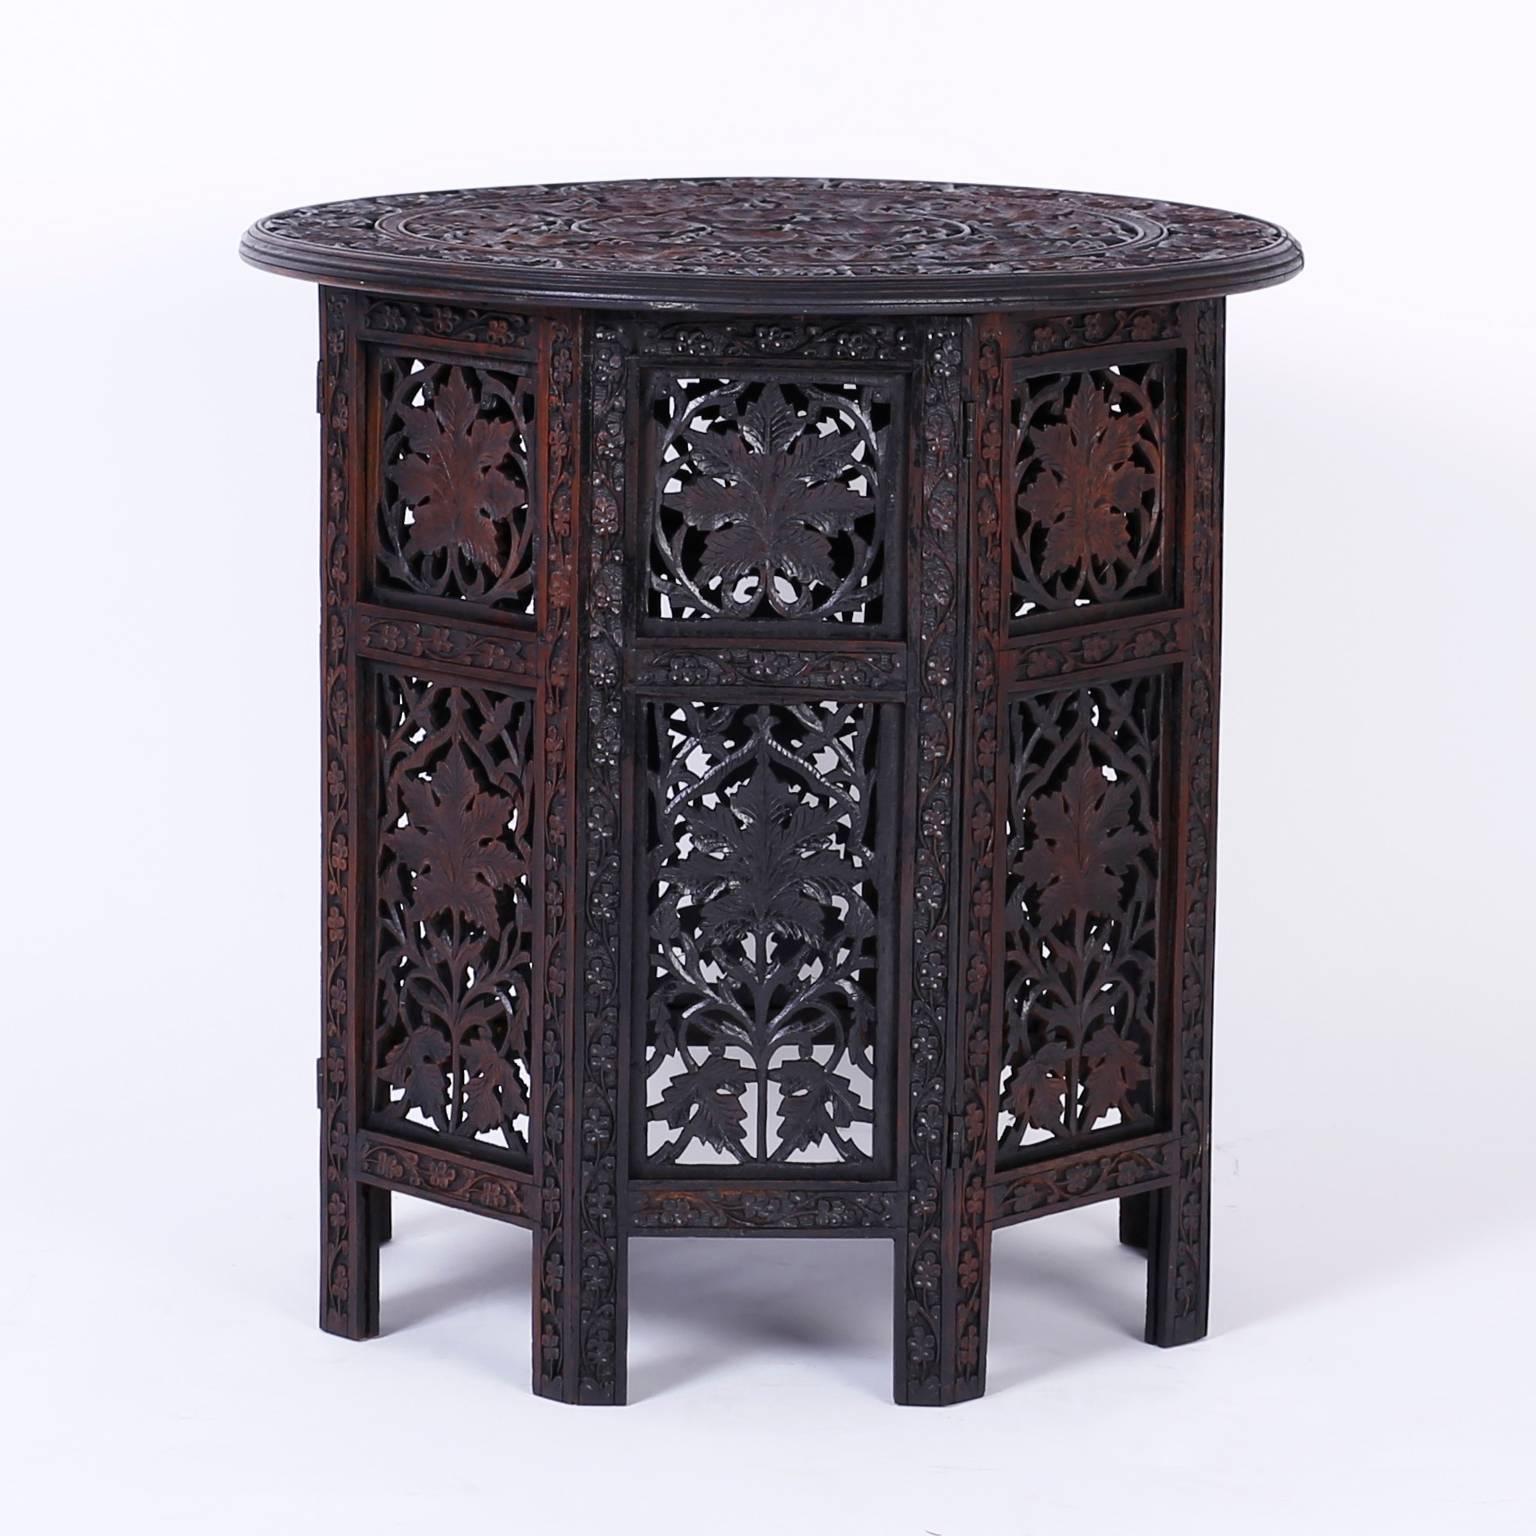 Intriguing pair of elaborately carved Anglo-Indian end or occasional tables with circular tops carved in a leaf and berry motif and an octagon paneled base with carved open fret work leaf designs.